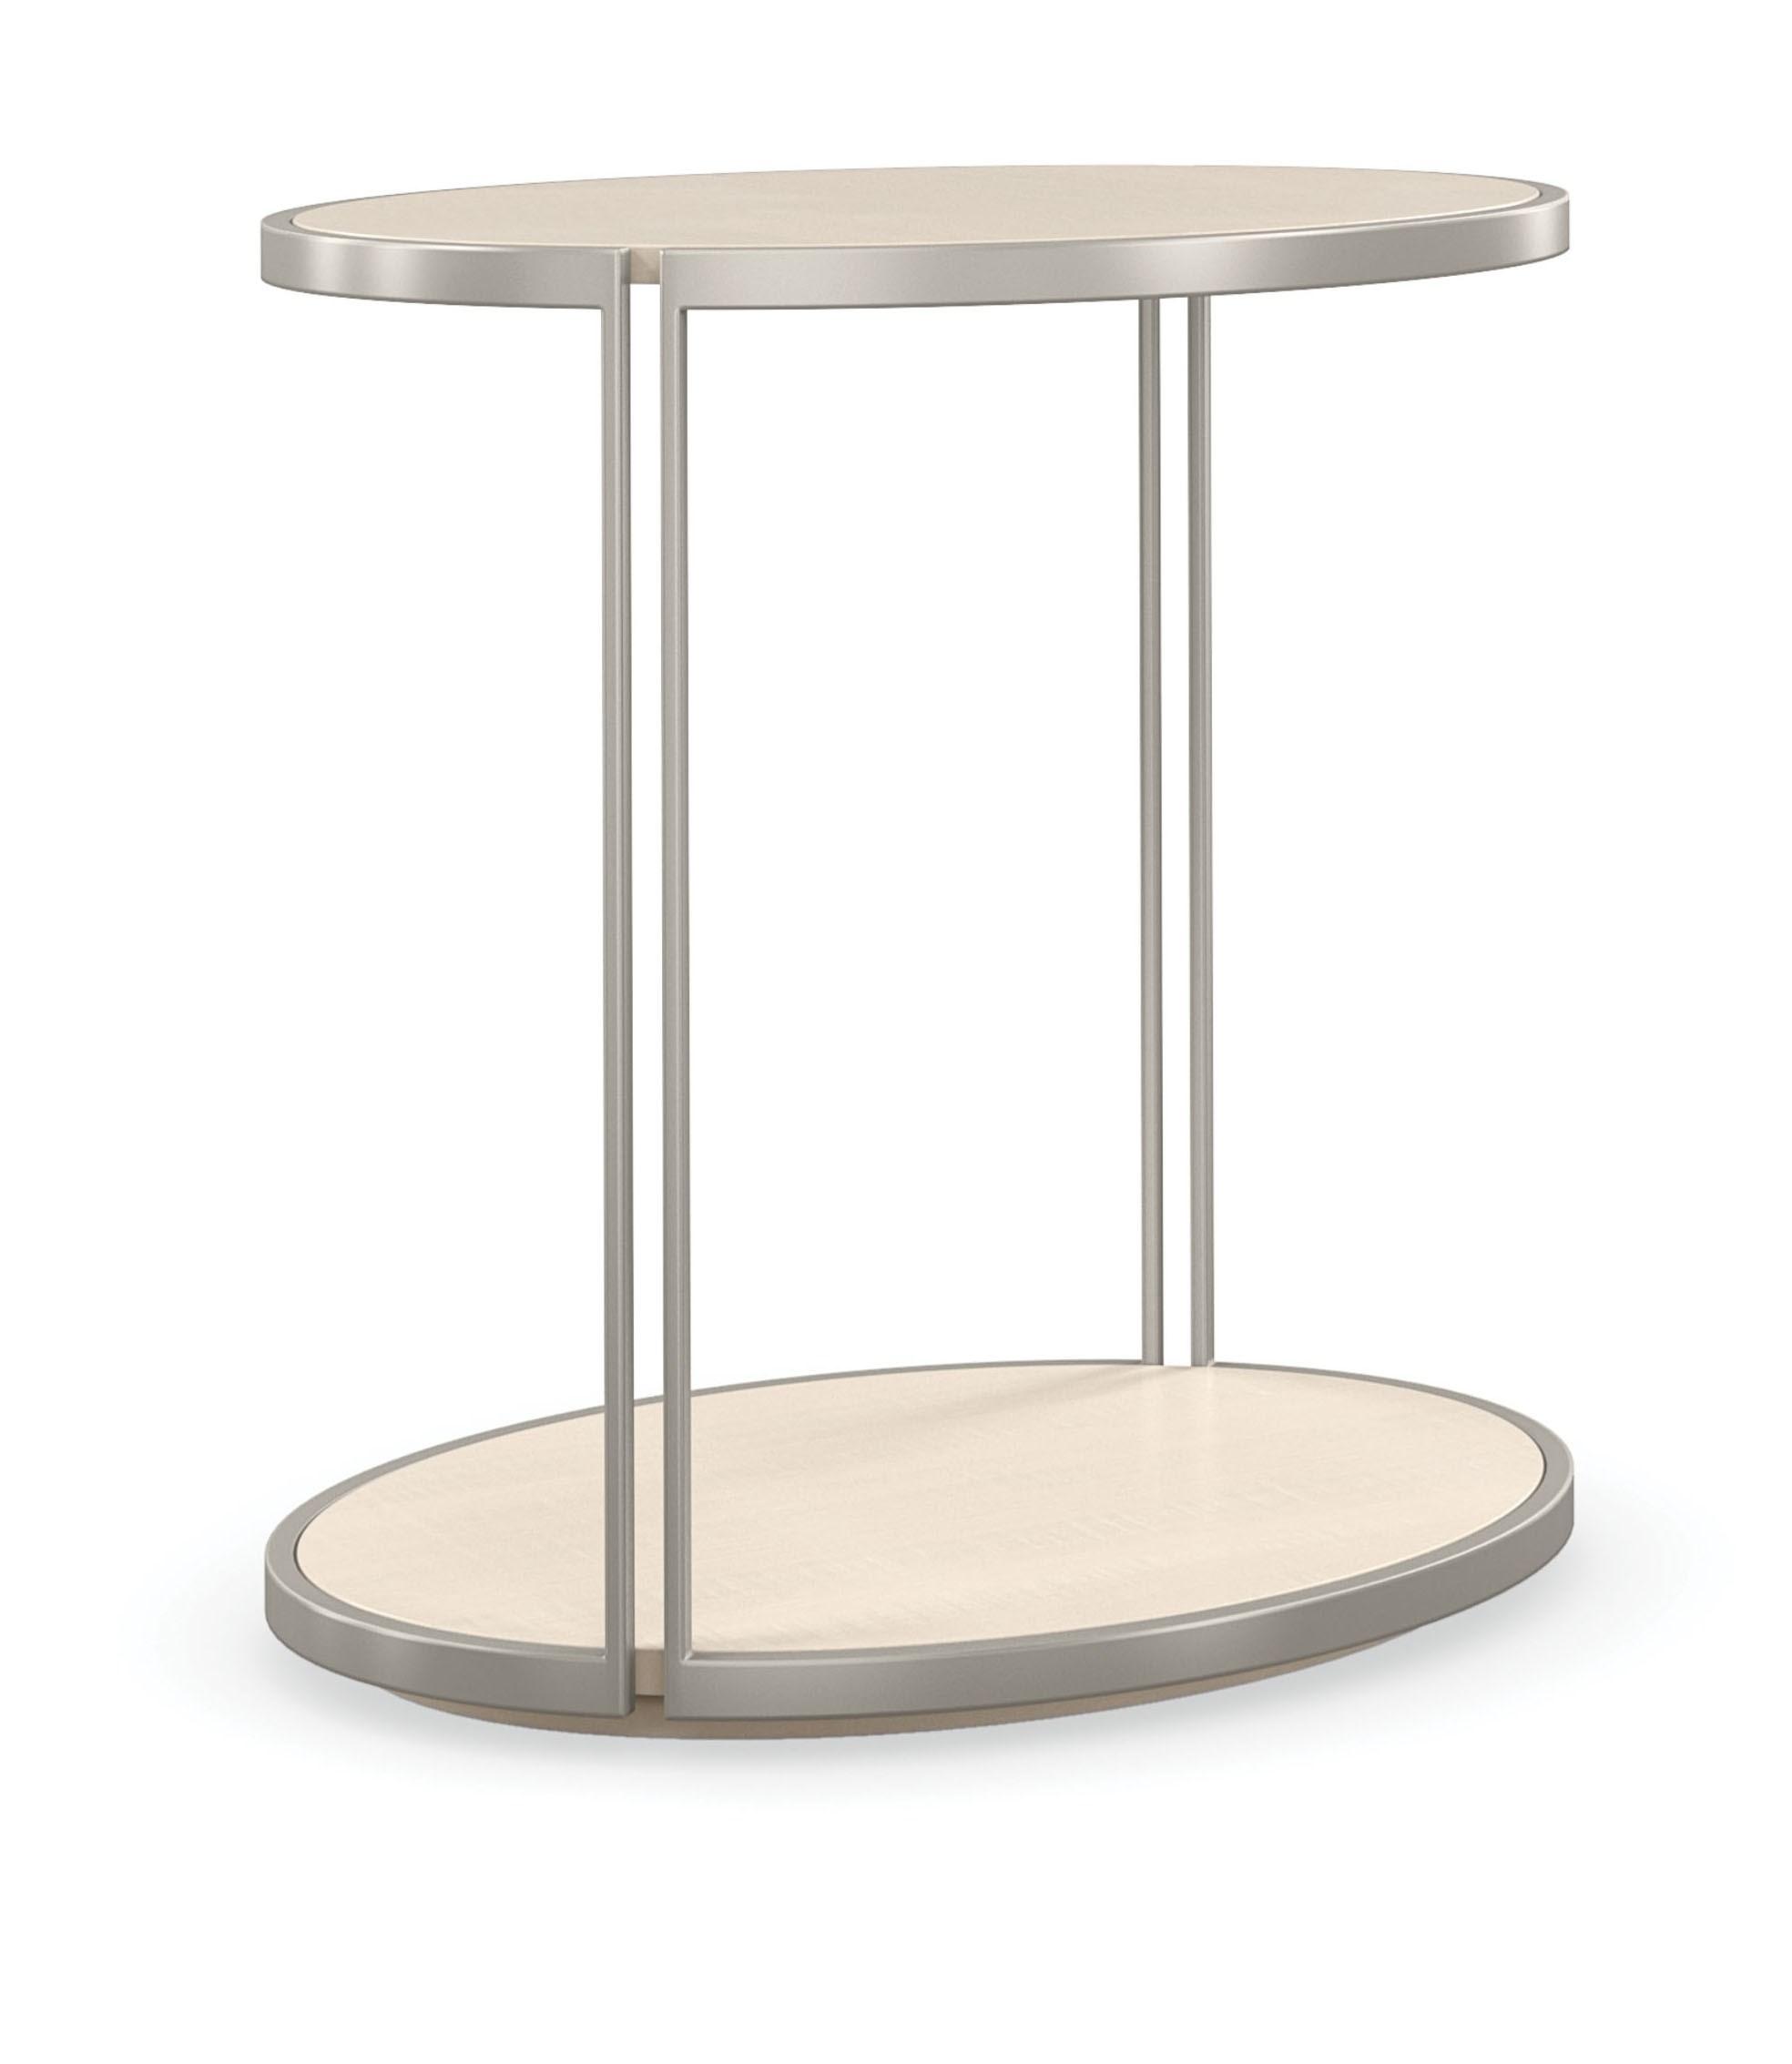 Contemporary End Table SIDE VIEW CLA-020-411 in Metallic, Cream, Gold 